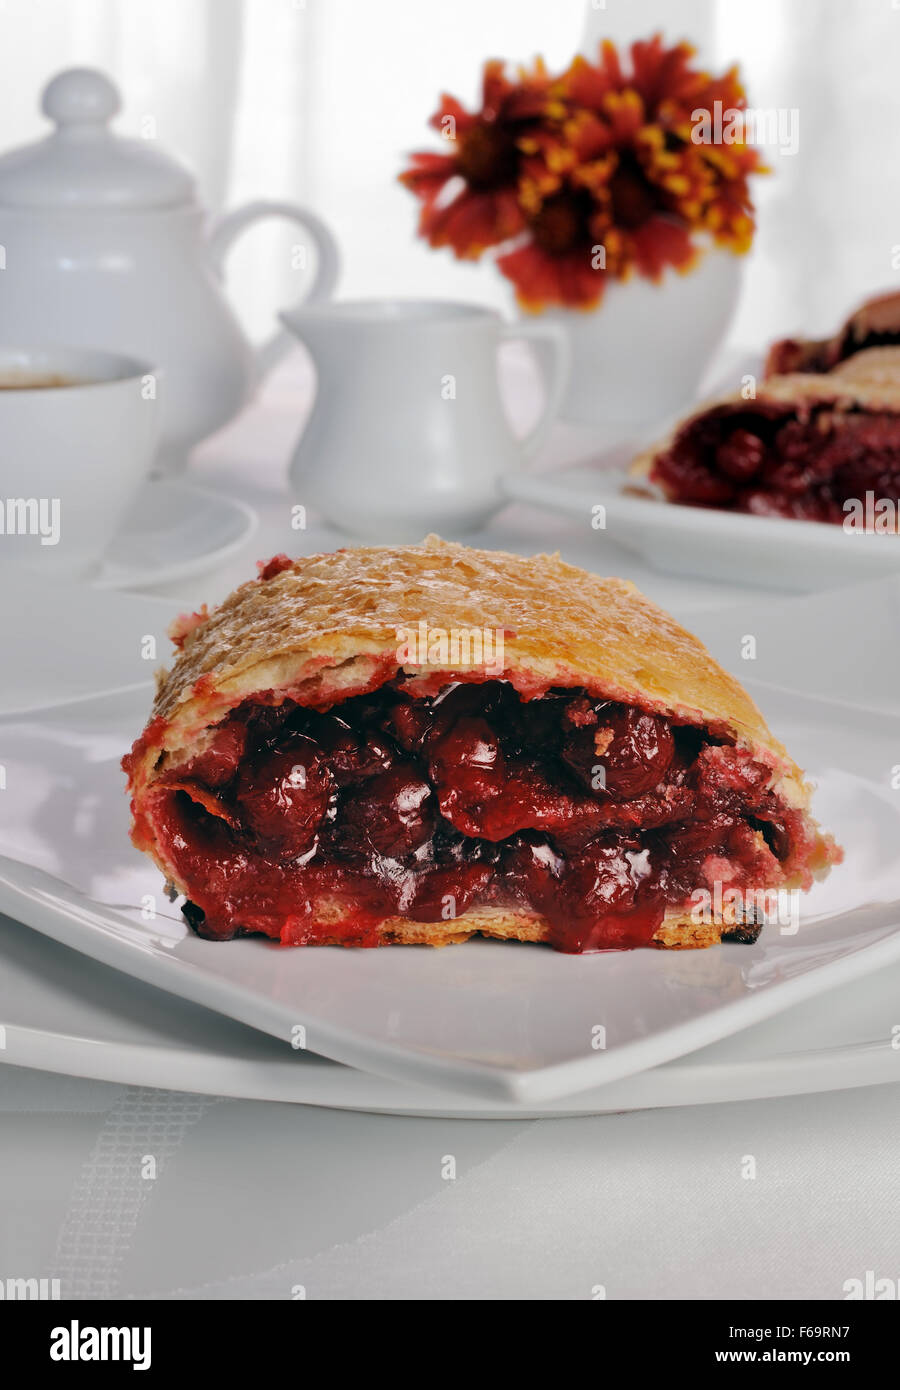 Piece of cherry strudel on the coffee table Stock Photo